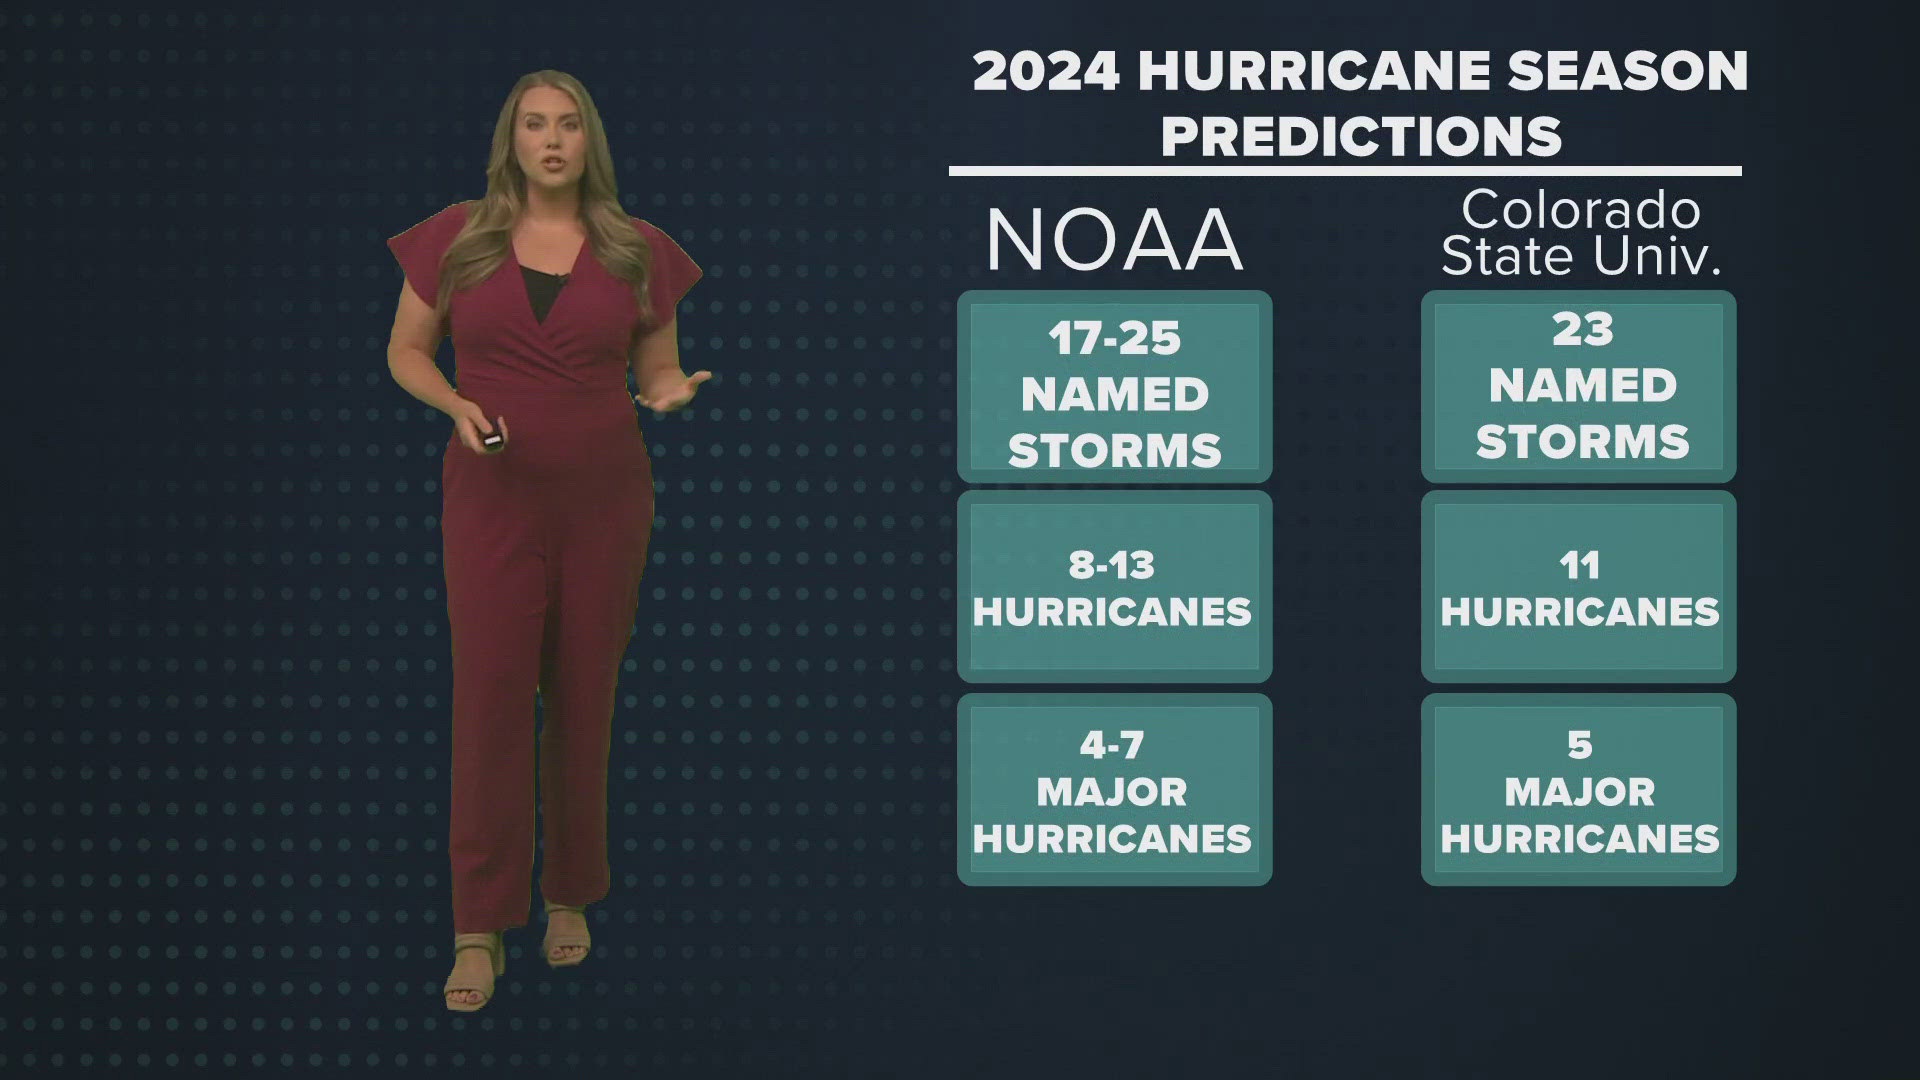 Just 10 days out from hurricane season, NOAA has released its hurricane outlook for the year. But how does it compare to past forecasts and how accurate were they?